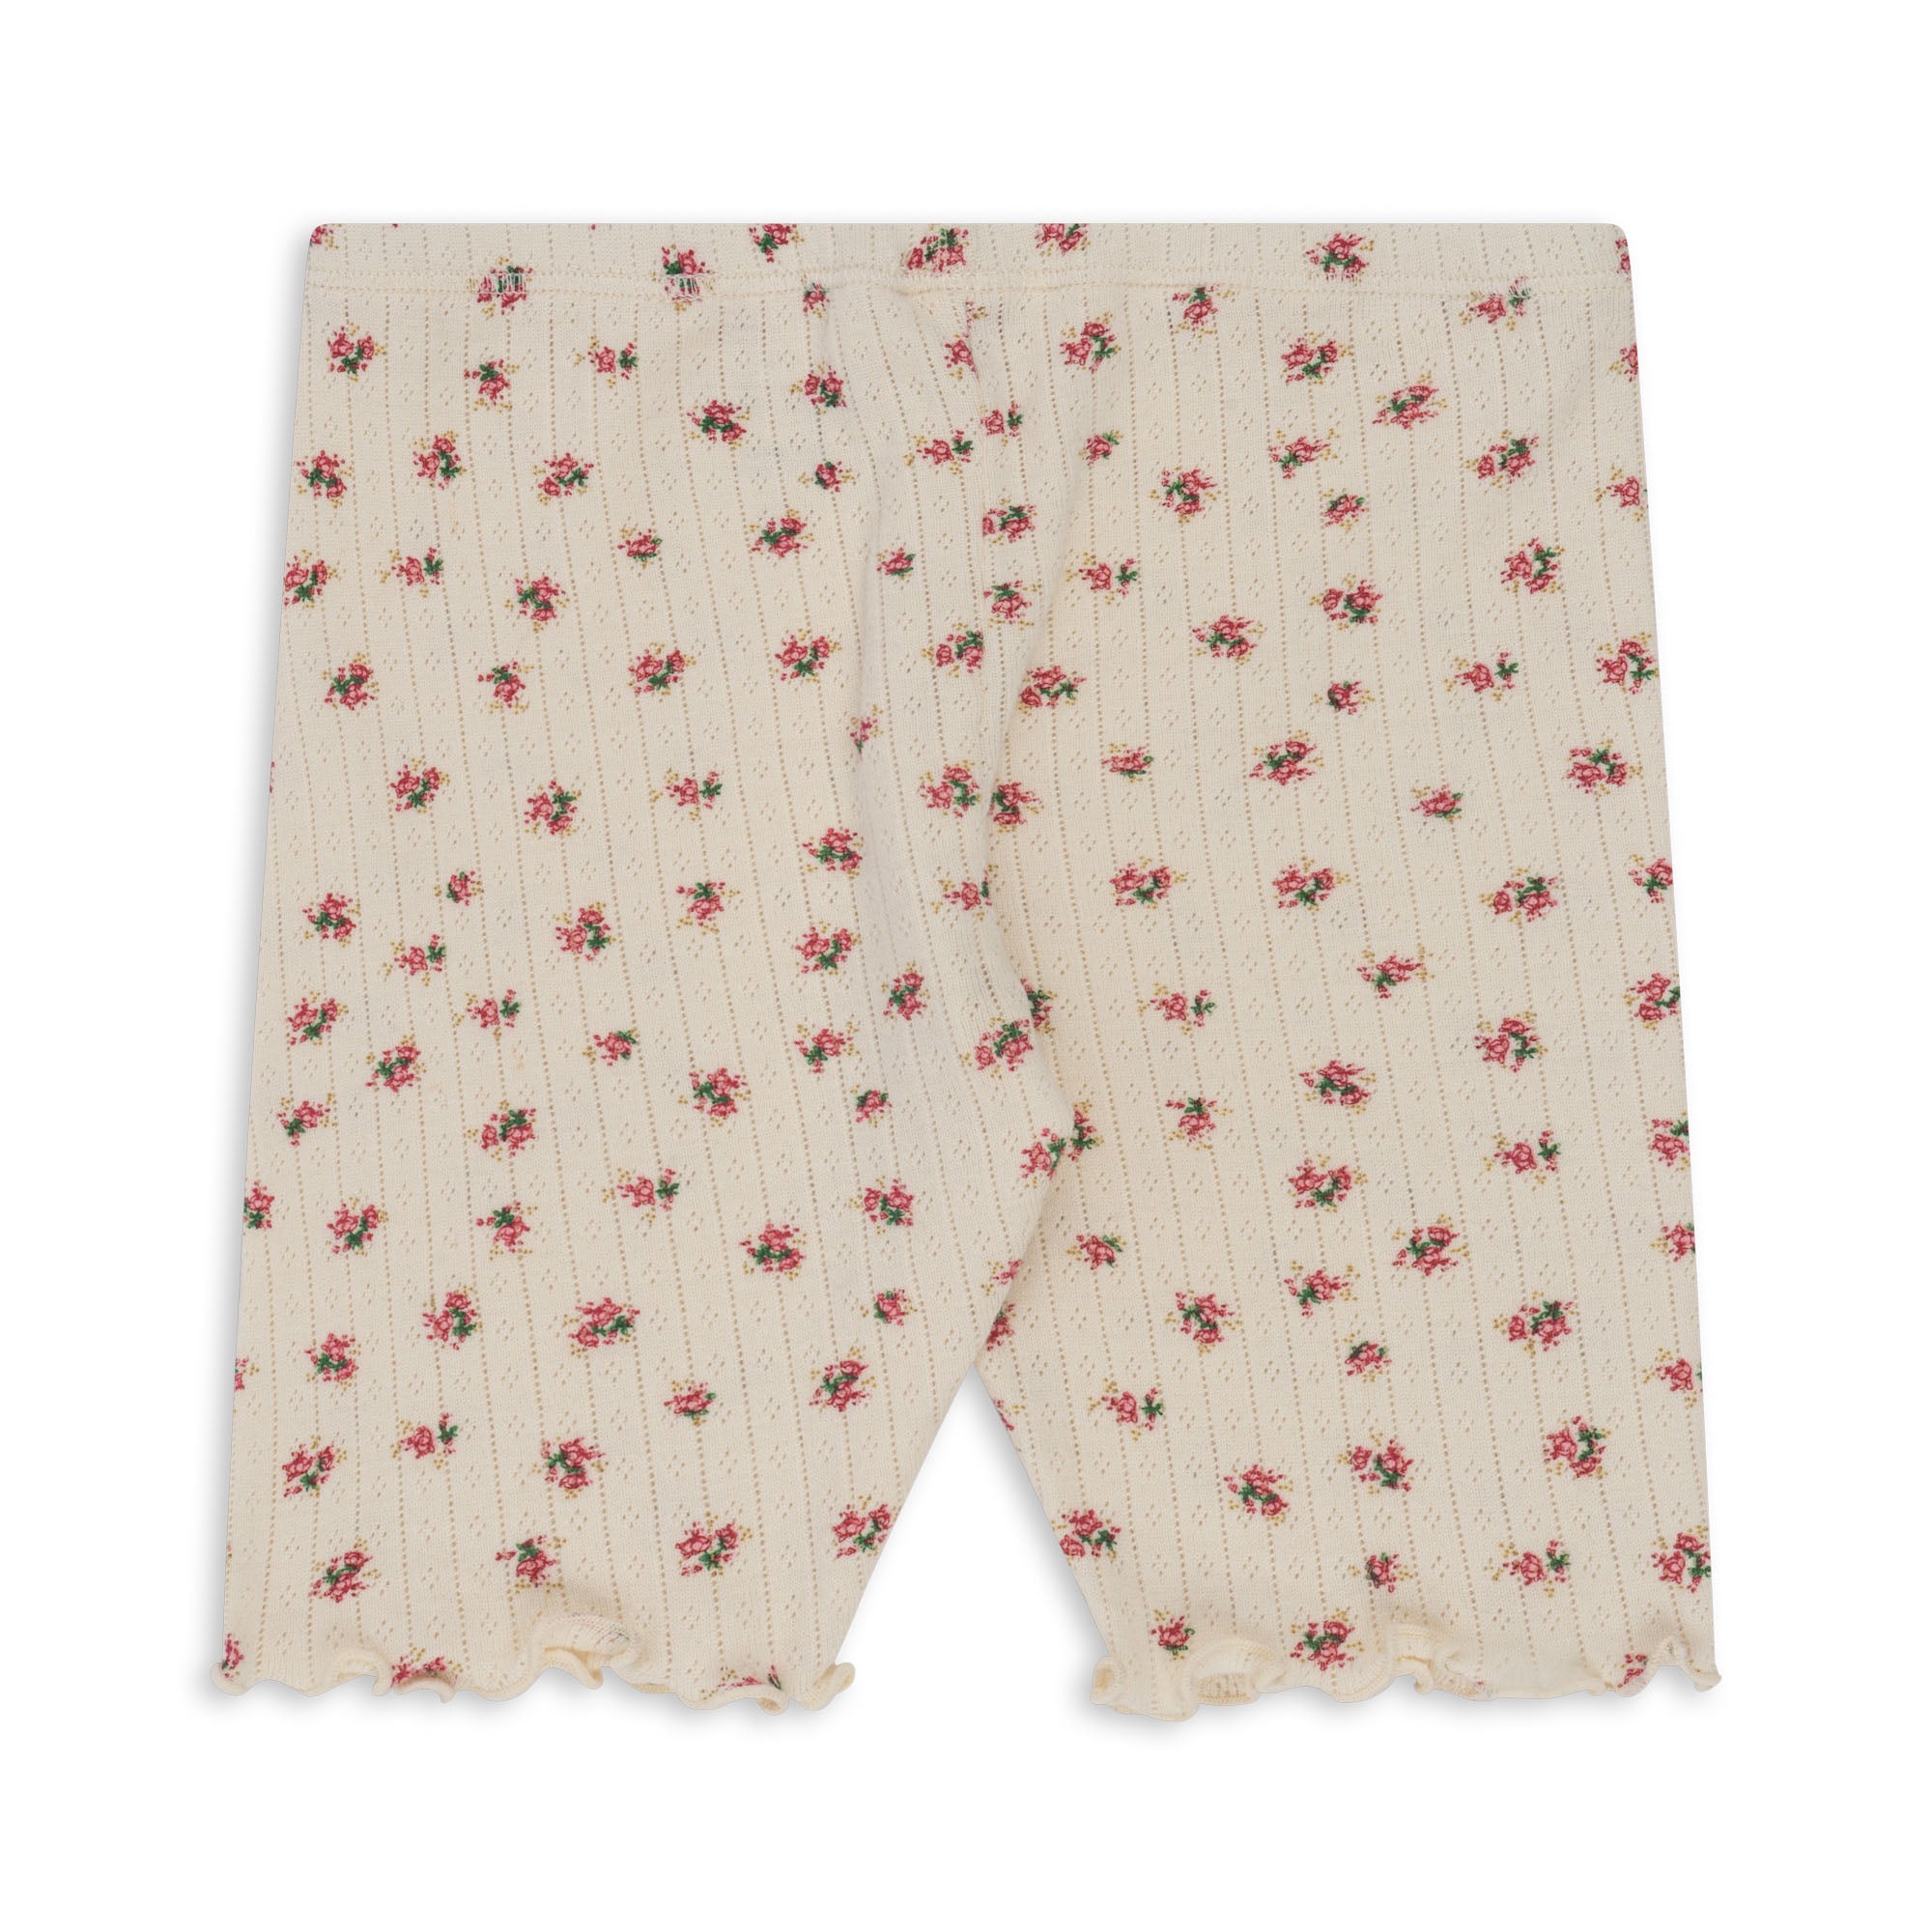 Konges Sløjd A/S JERSEY SHORTS & BLOOMERS BLOOMIE